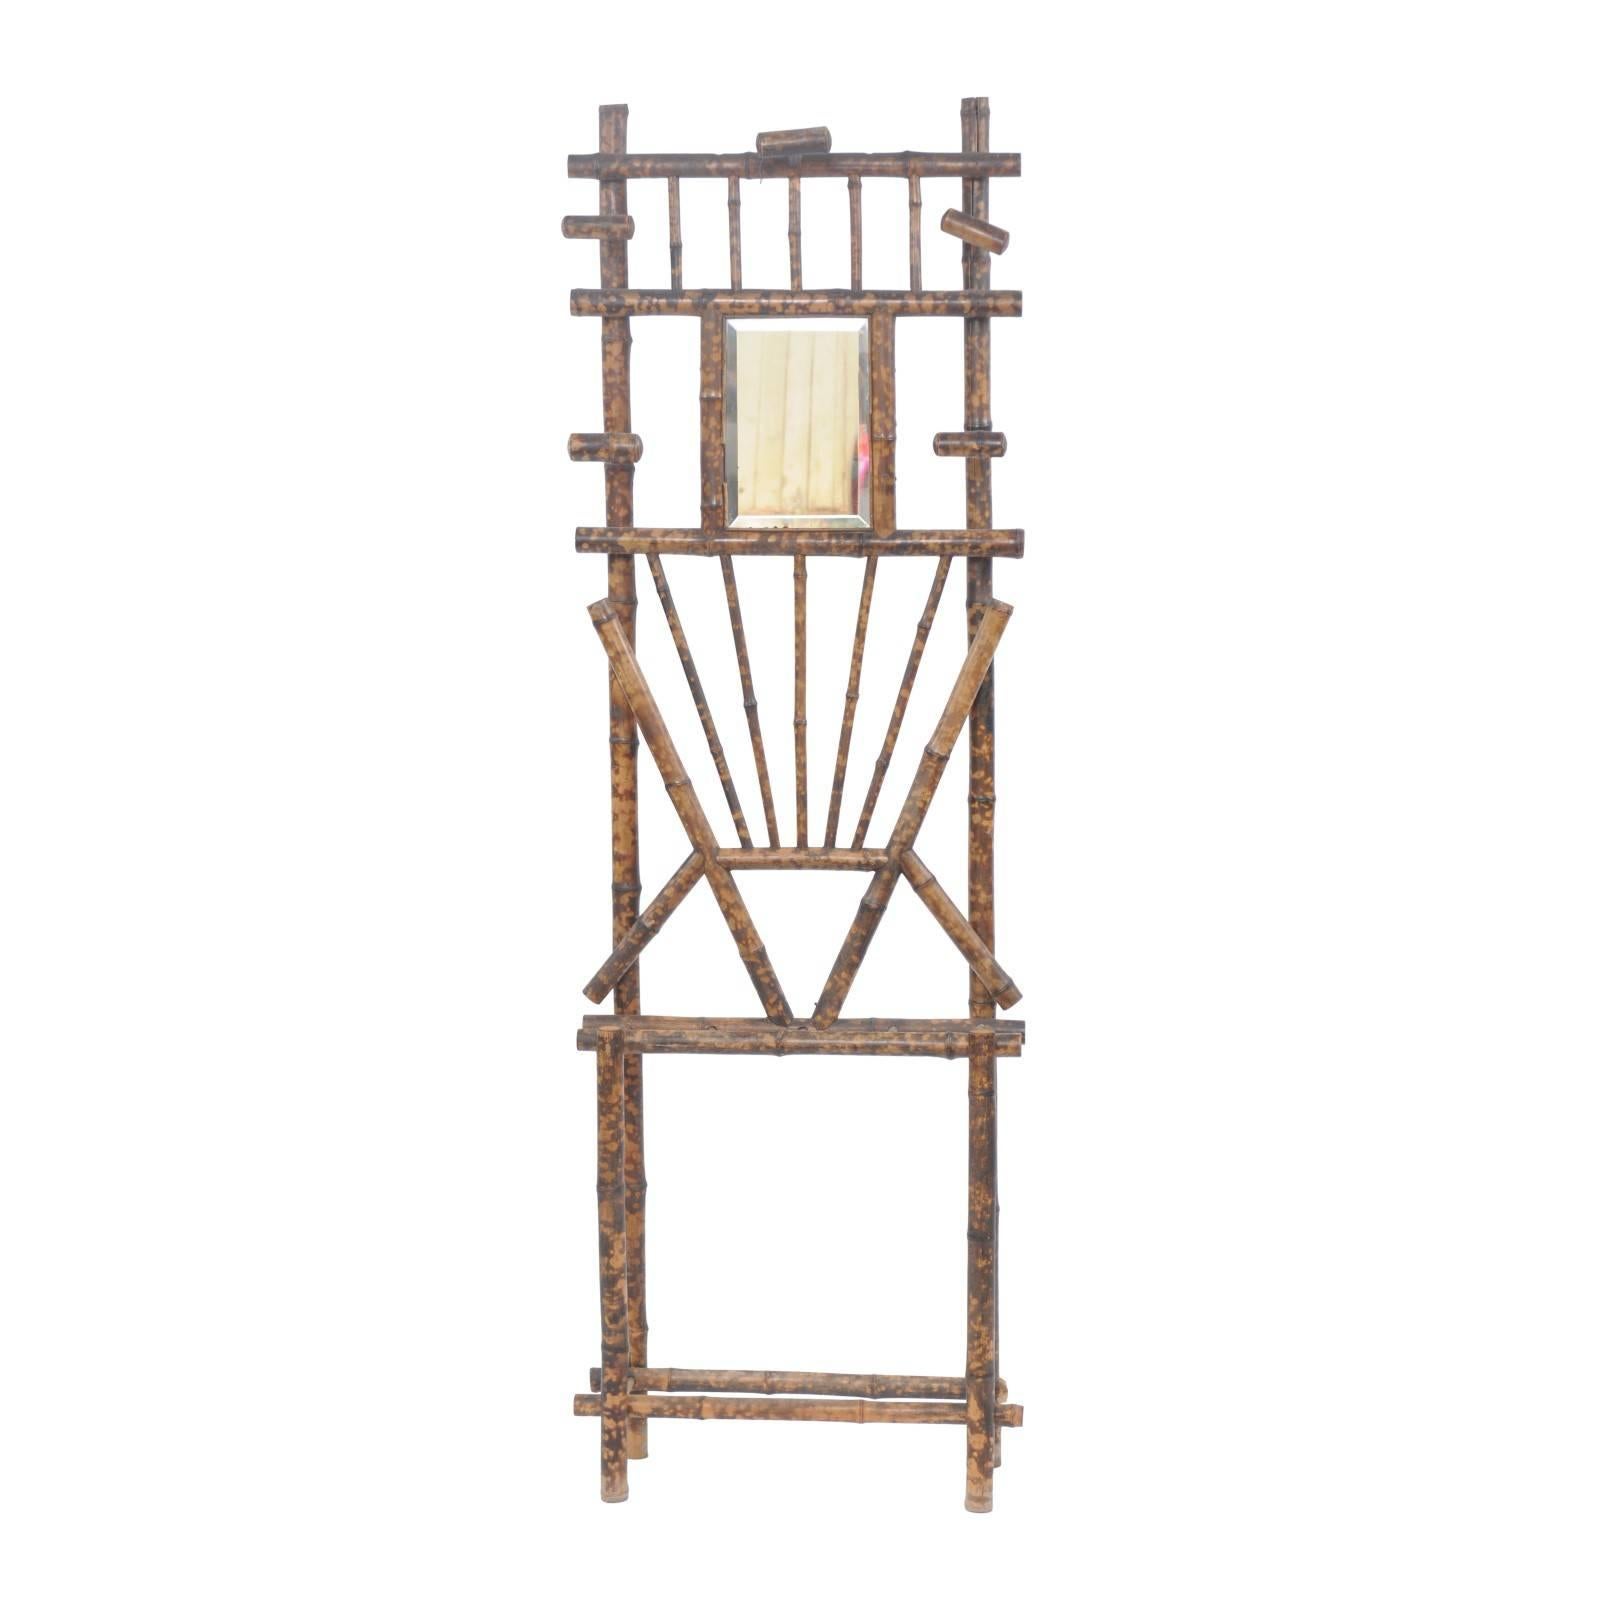 French Tortoise-Colored Faux-Bamboo Coat Rack with Mirror from the 19th Century